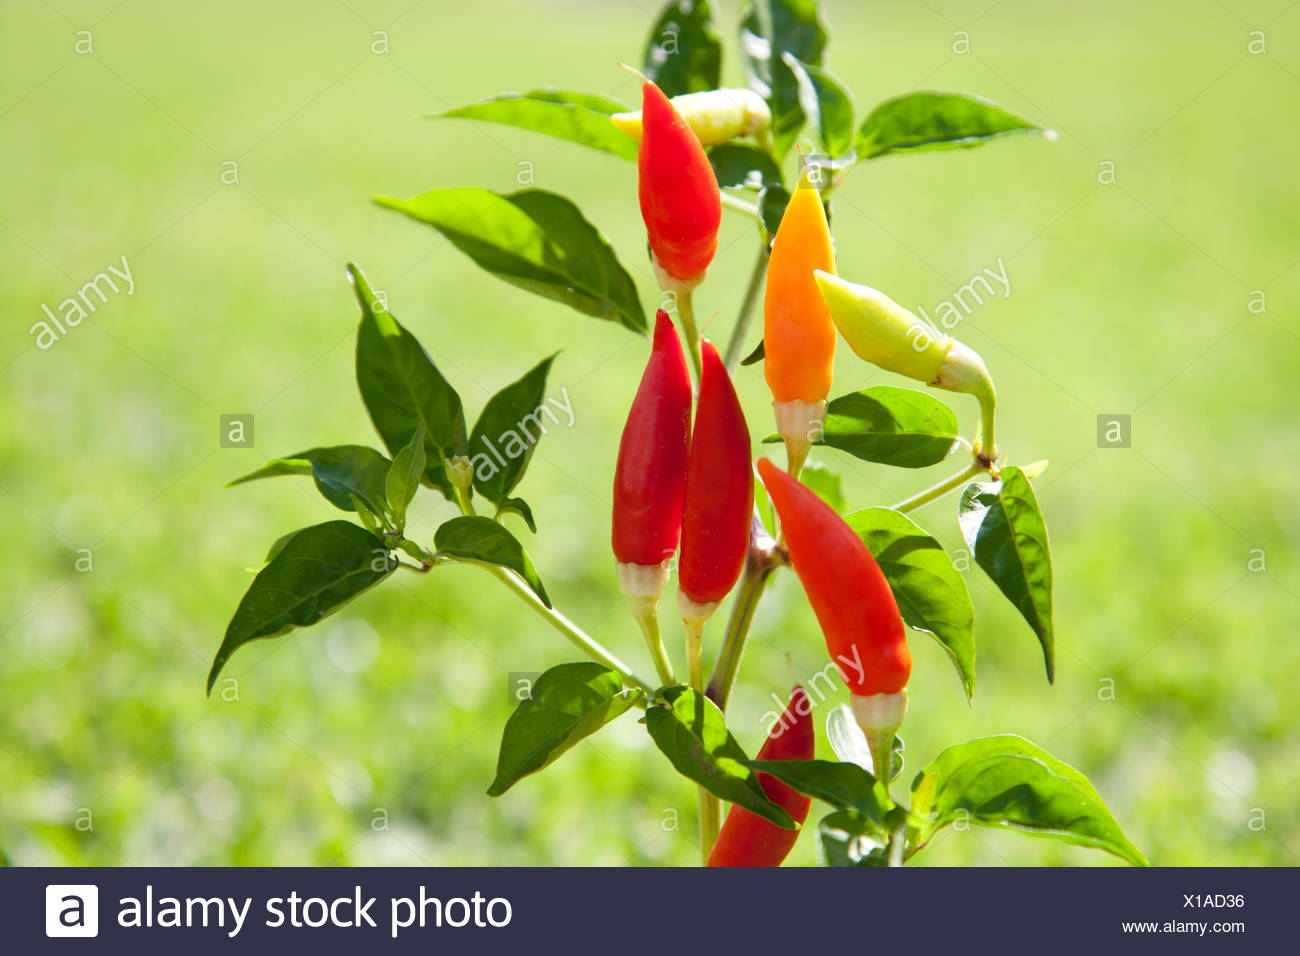 Food Aliment Pepper Agricultural Spice Condiment Garden